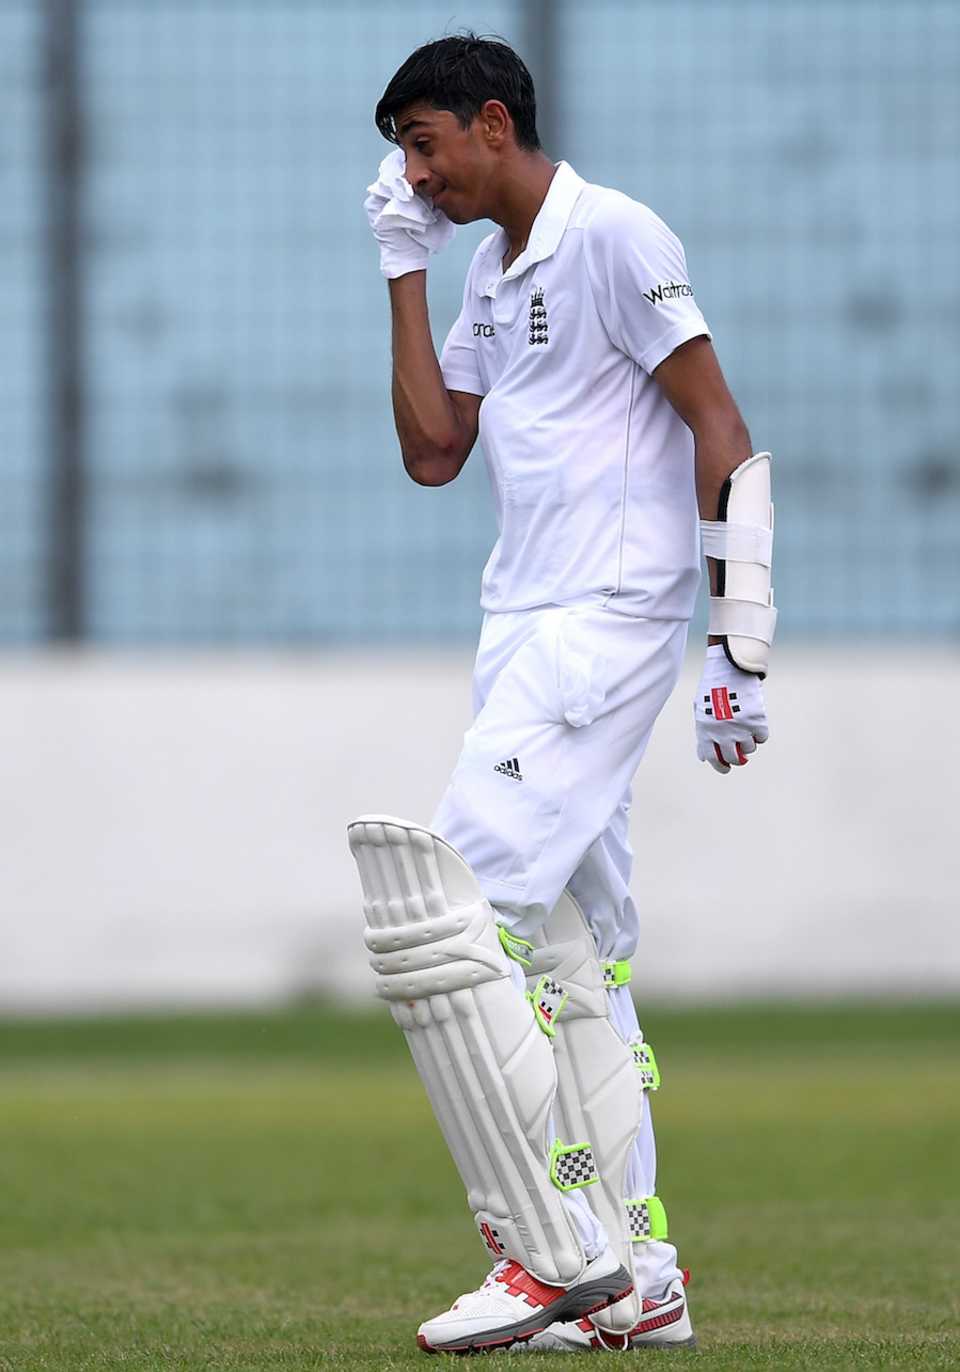 Haseeb Hameed was dismissed for 16, BCB XI v England XI, Chittagong, 2nd day, October 15, 2016